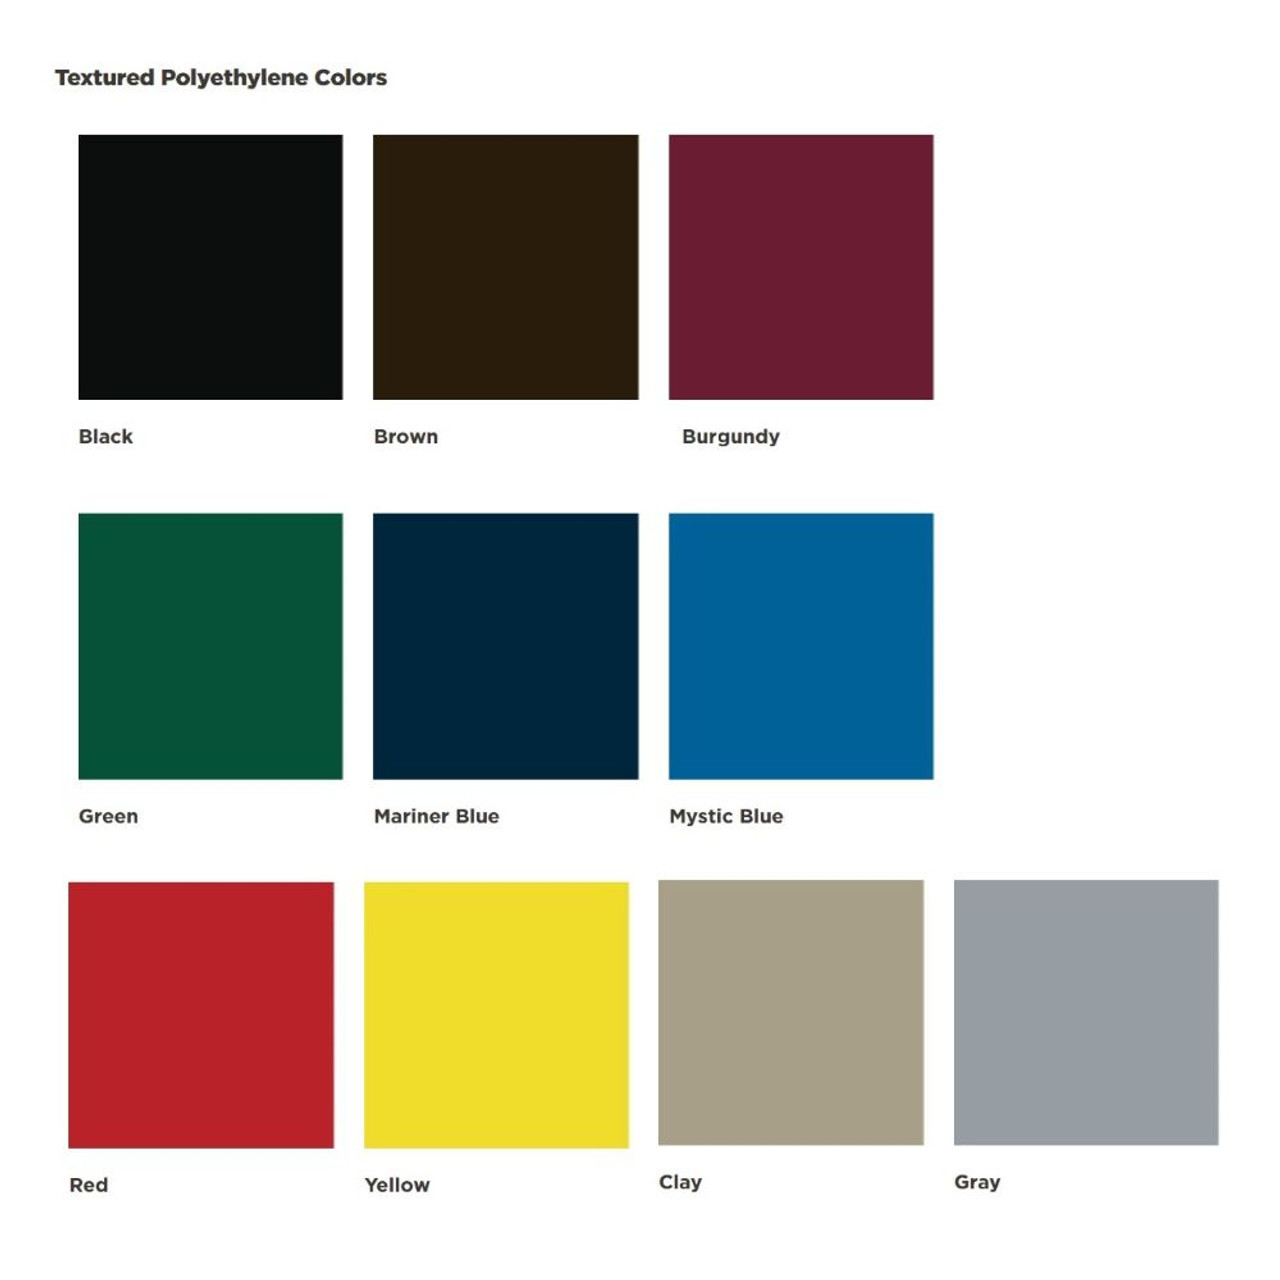 Polyethylene color choices - call to order other options